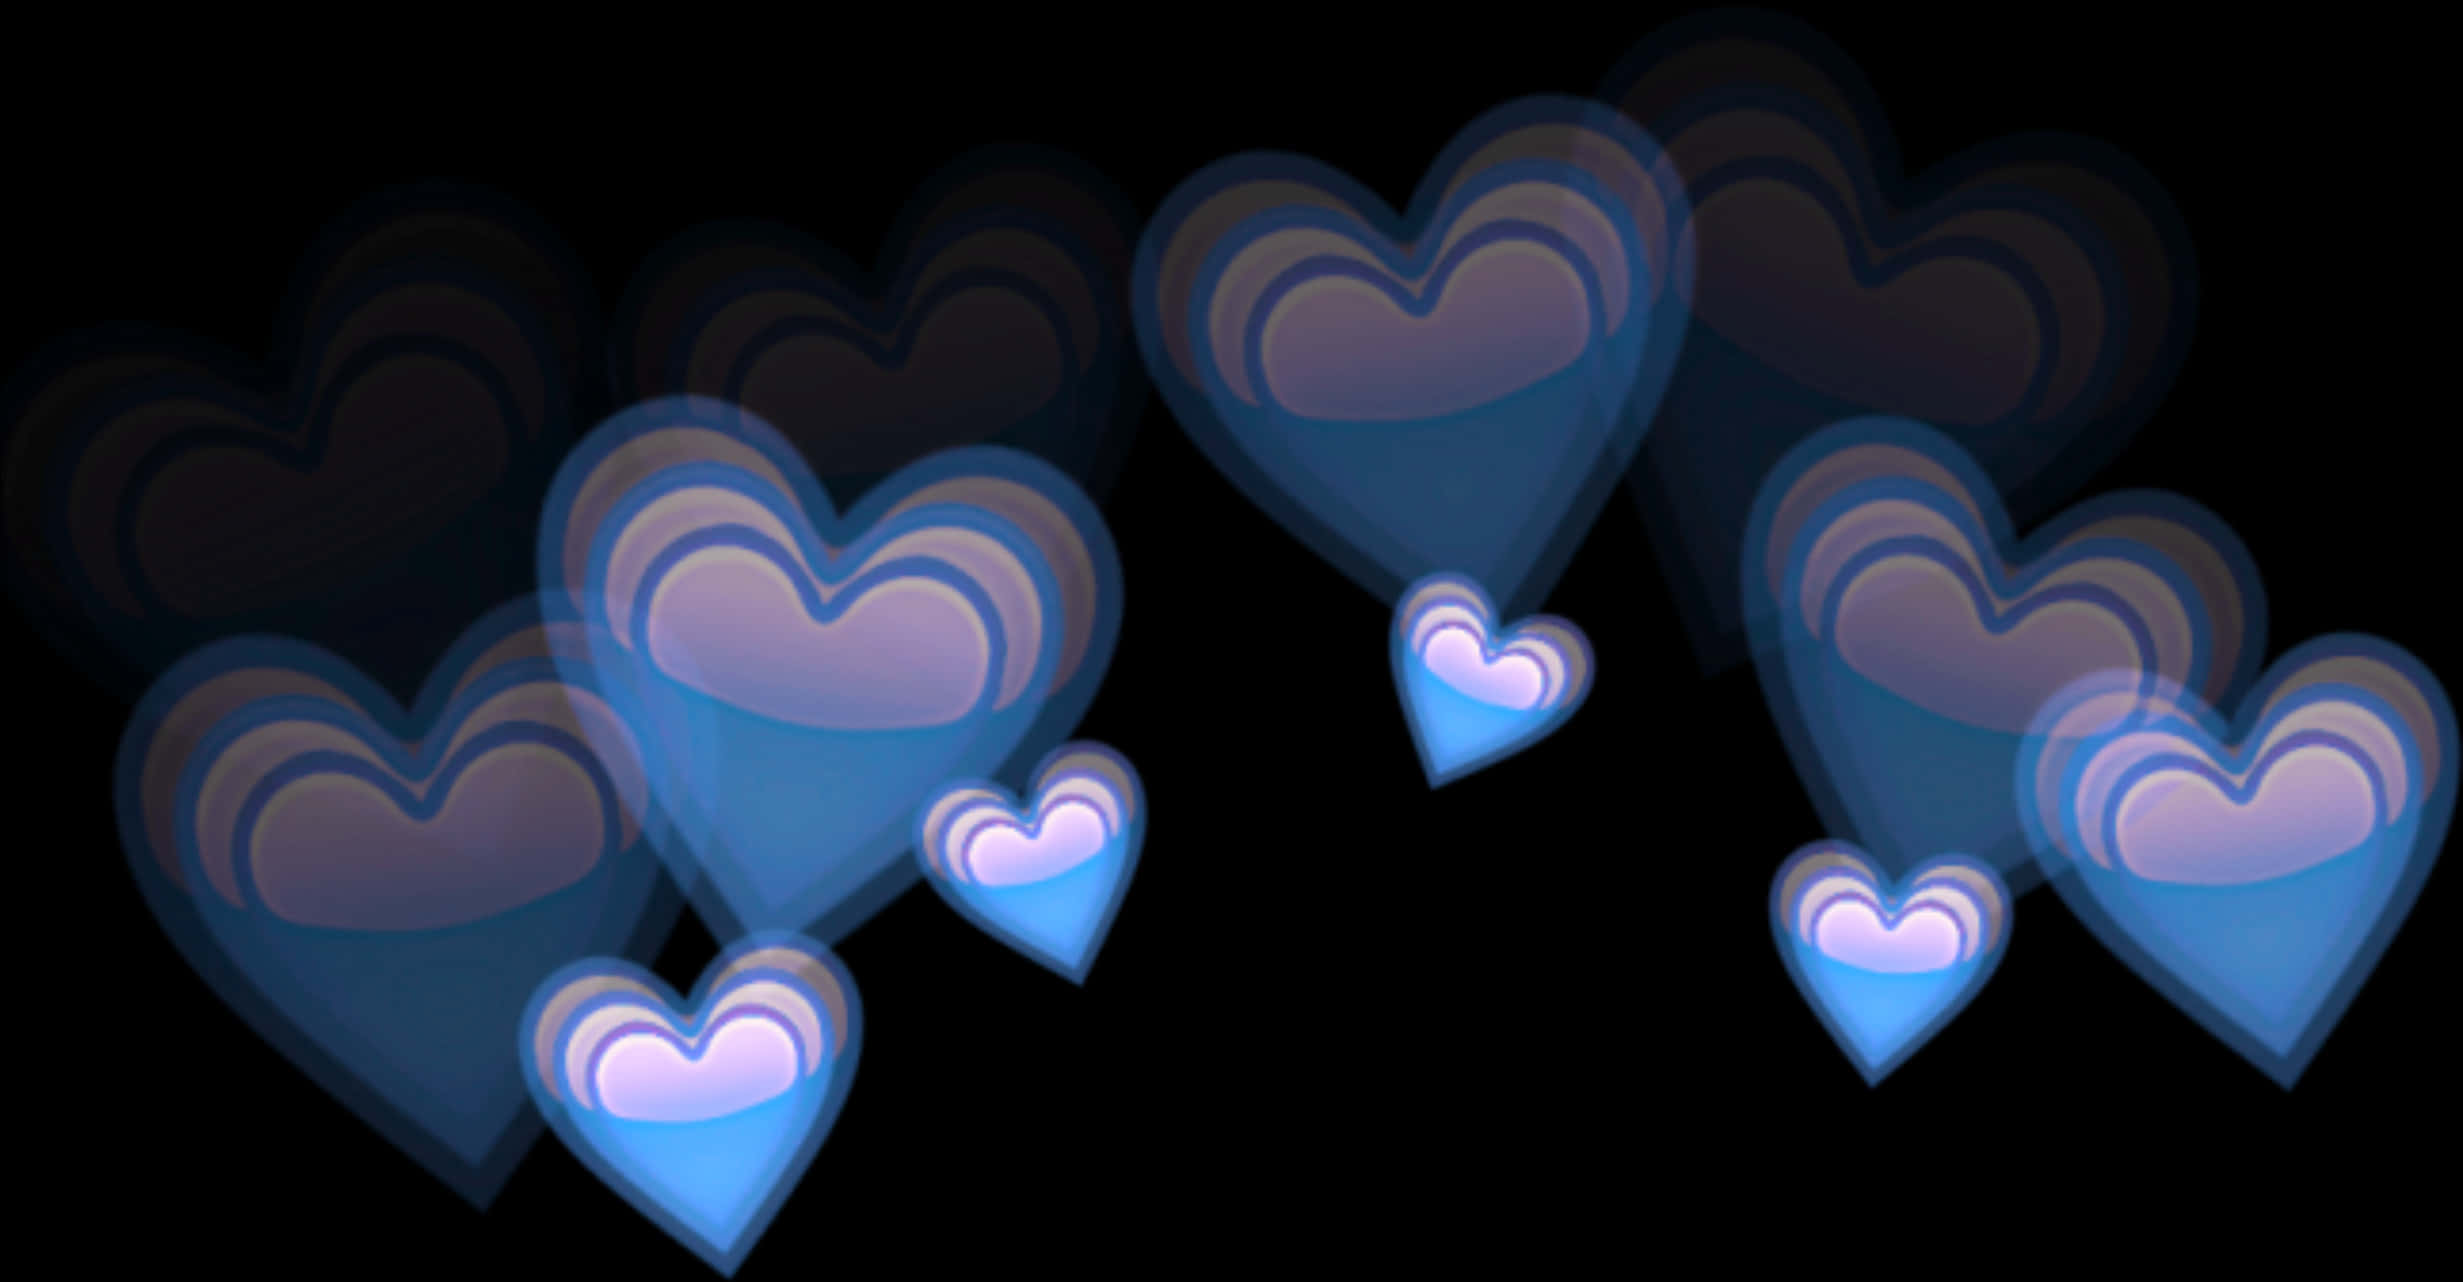 A Group Of Blue Hearts